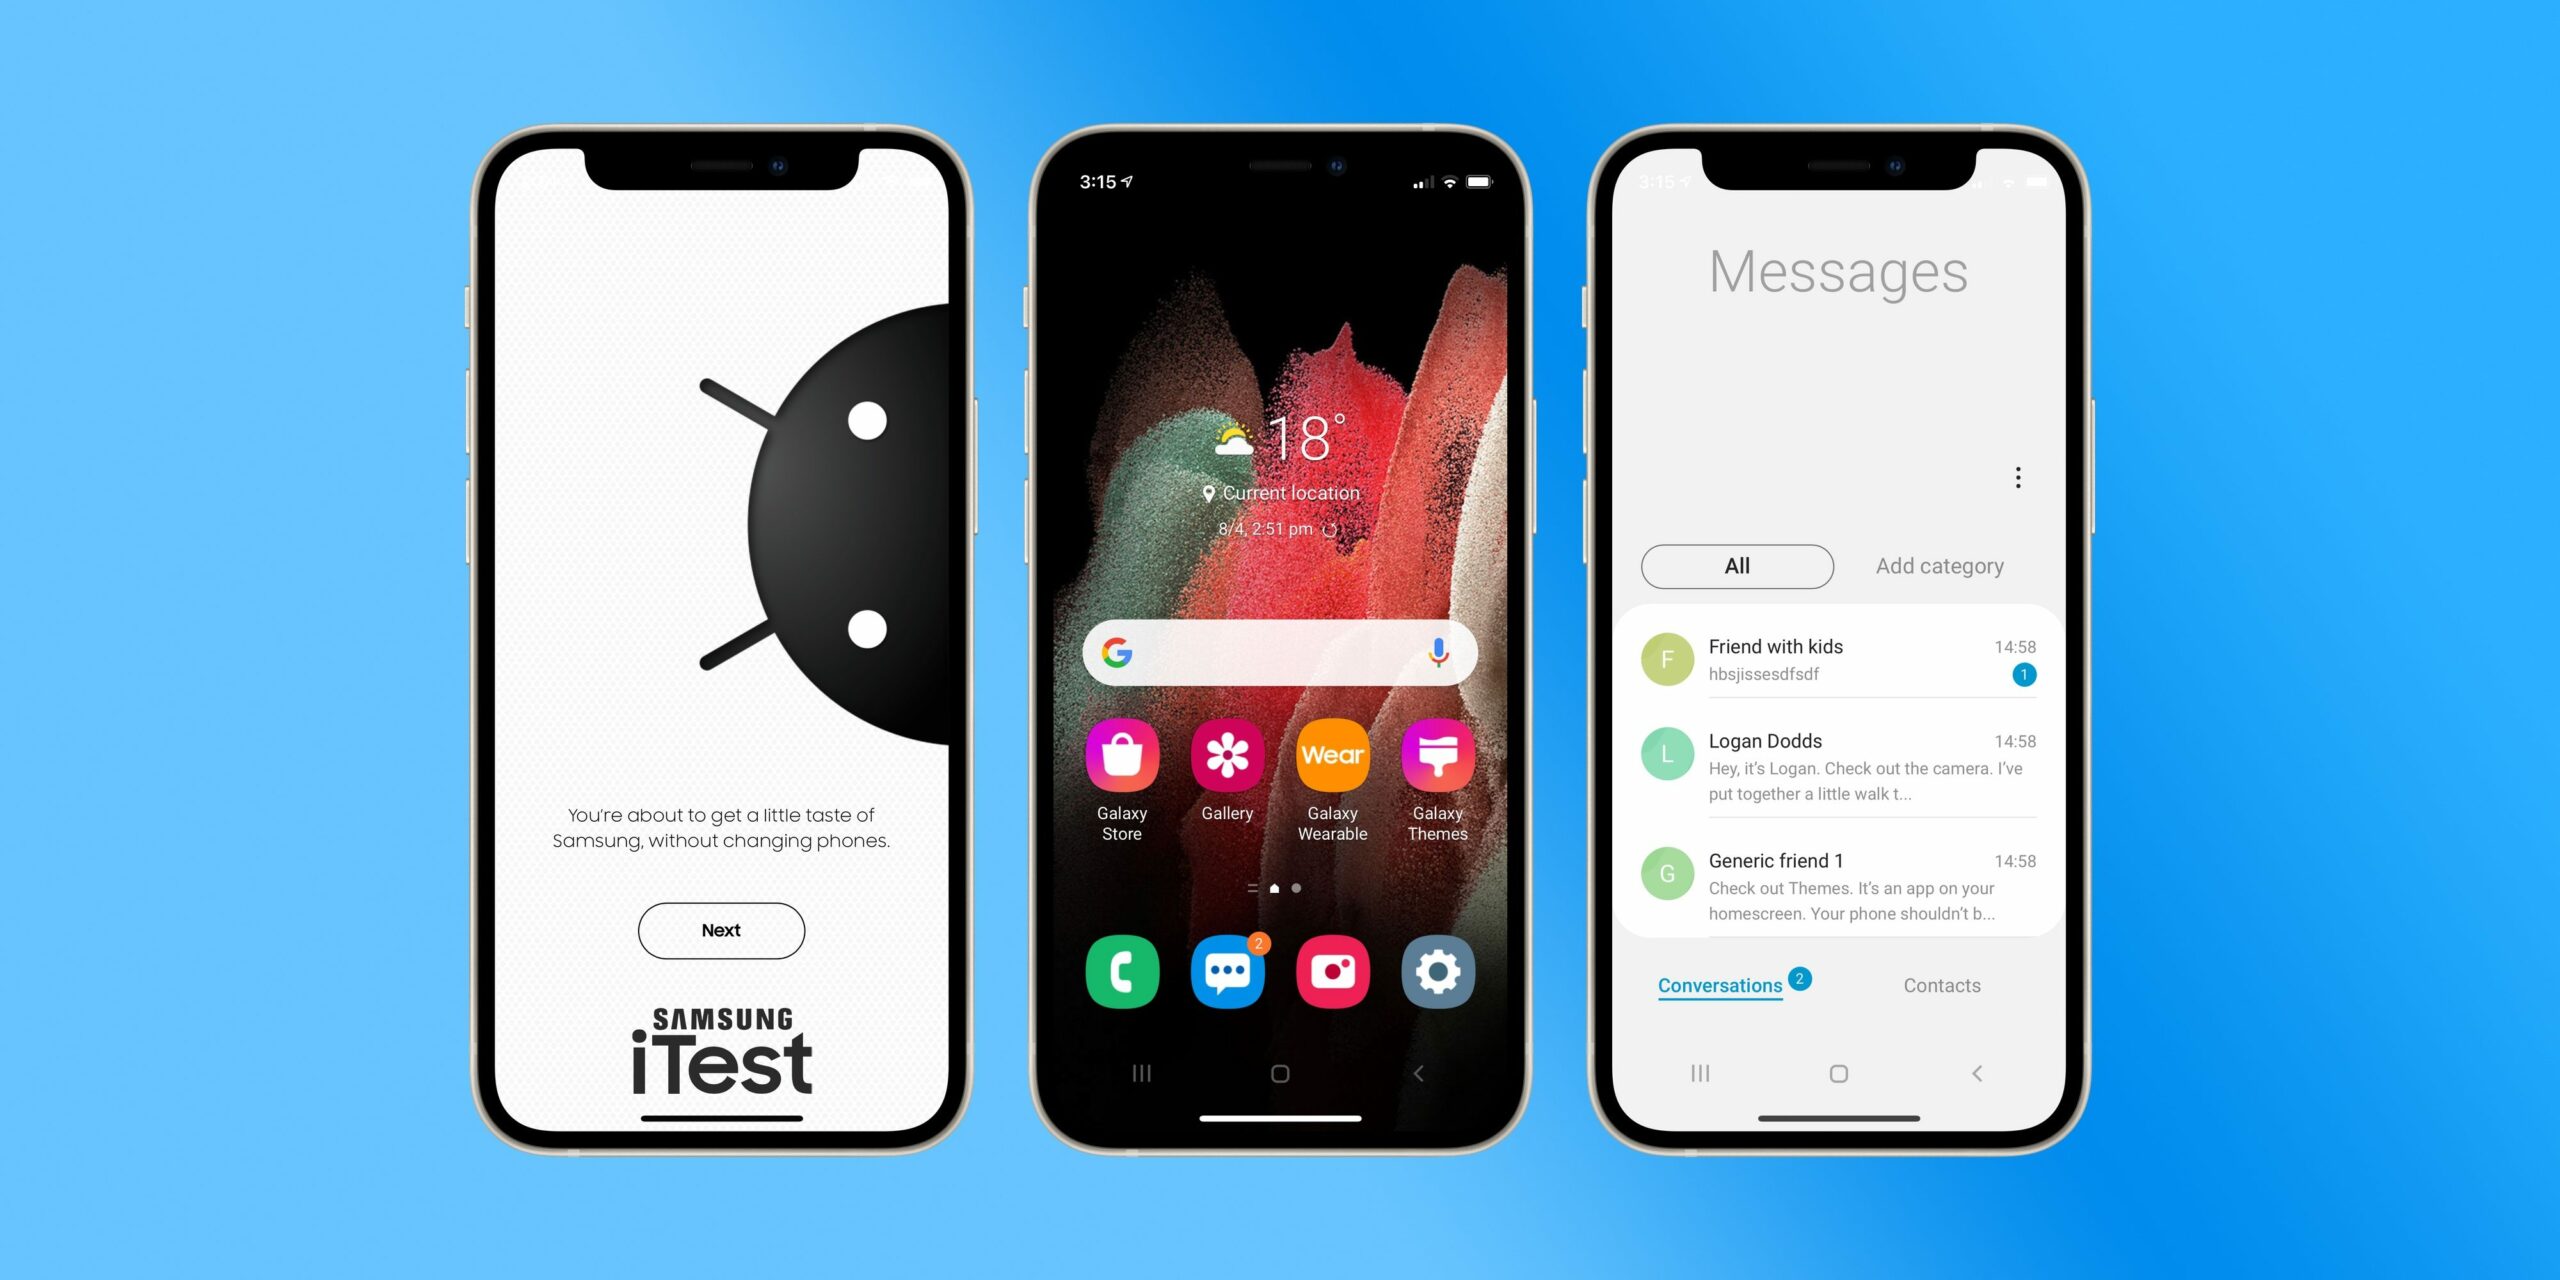 Samsung allows you transform your iPhone to a Samsung Android with iTest